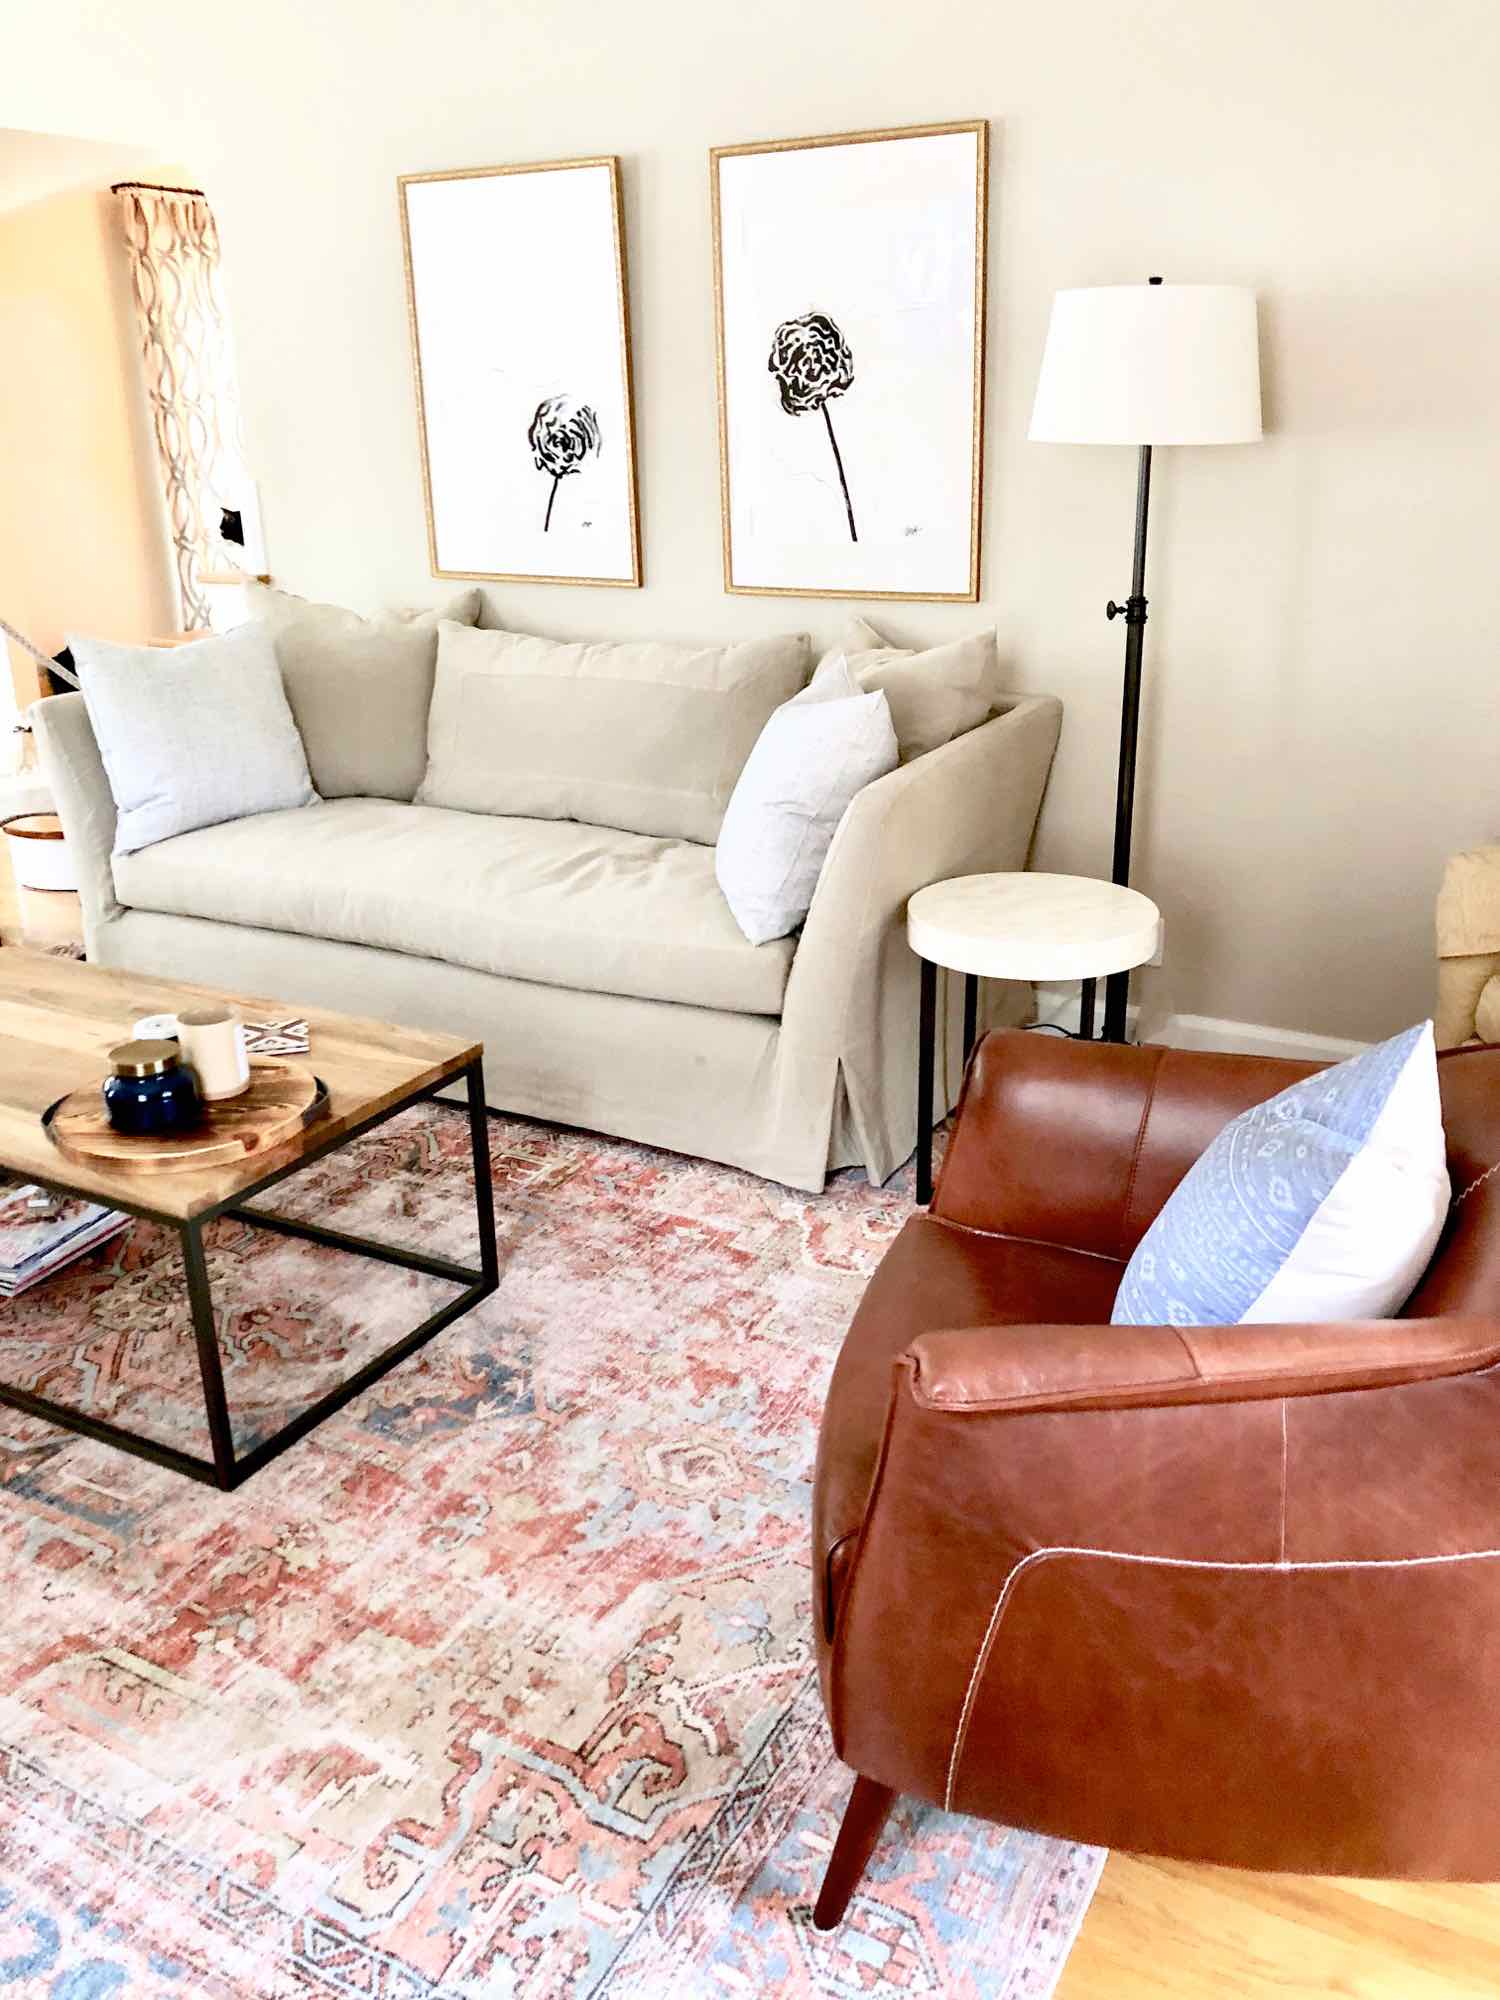  The Seda Sofa by Cisco Brothers in all it's creamy, natural linen glory!&nbsp; Fabric is Mariet Natural.&nbsp; This is the 7' length.&nbsp; We opted to go the slipcover route -- but it can also be ordered upholstered. 